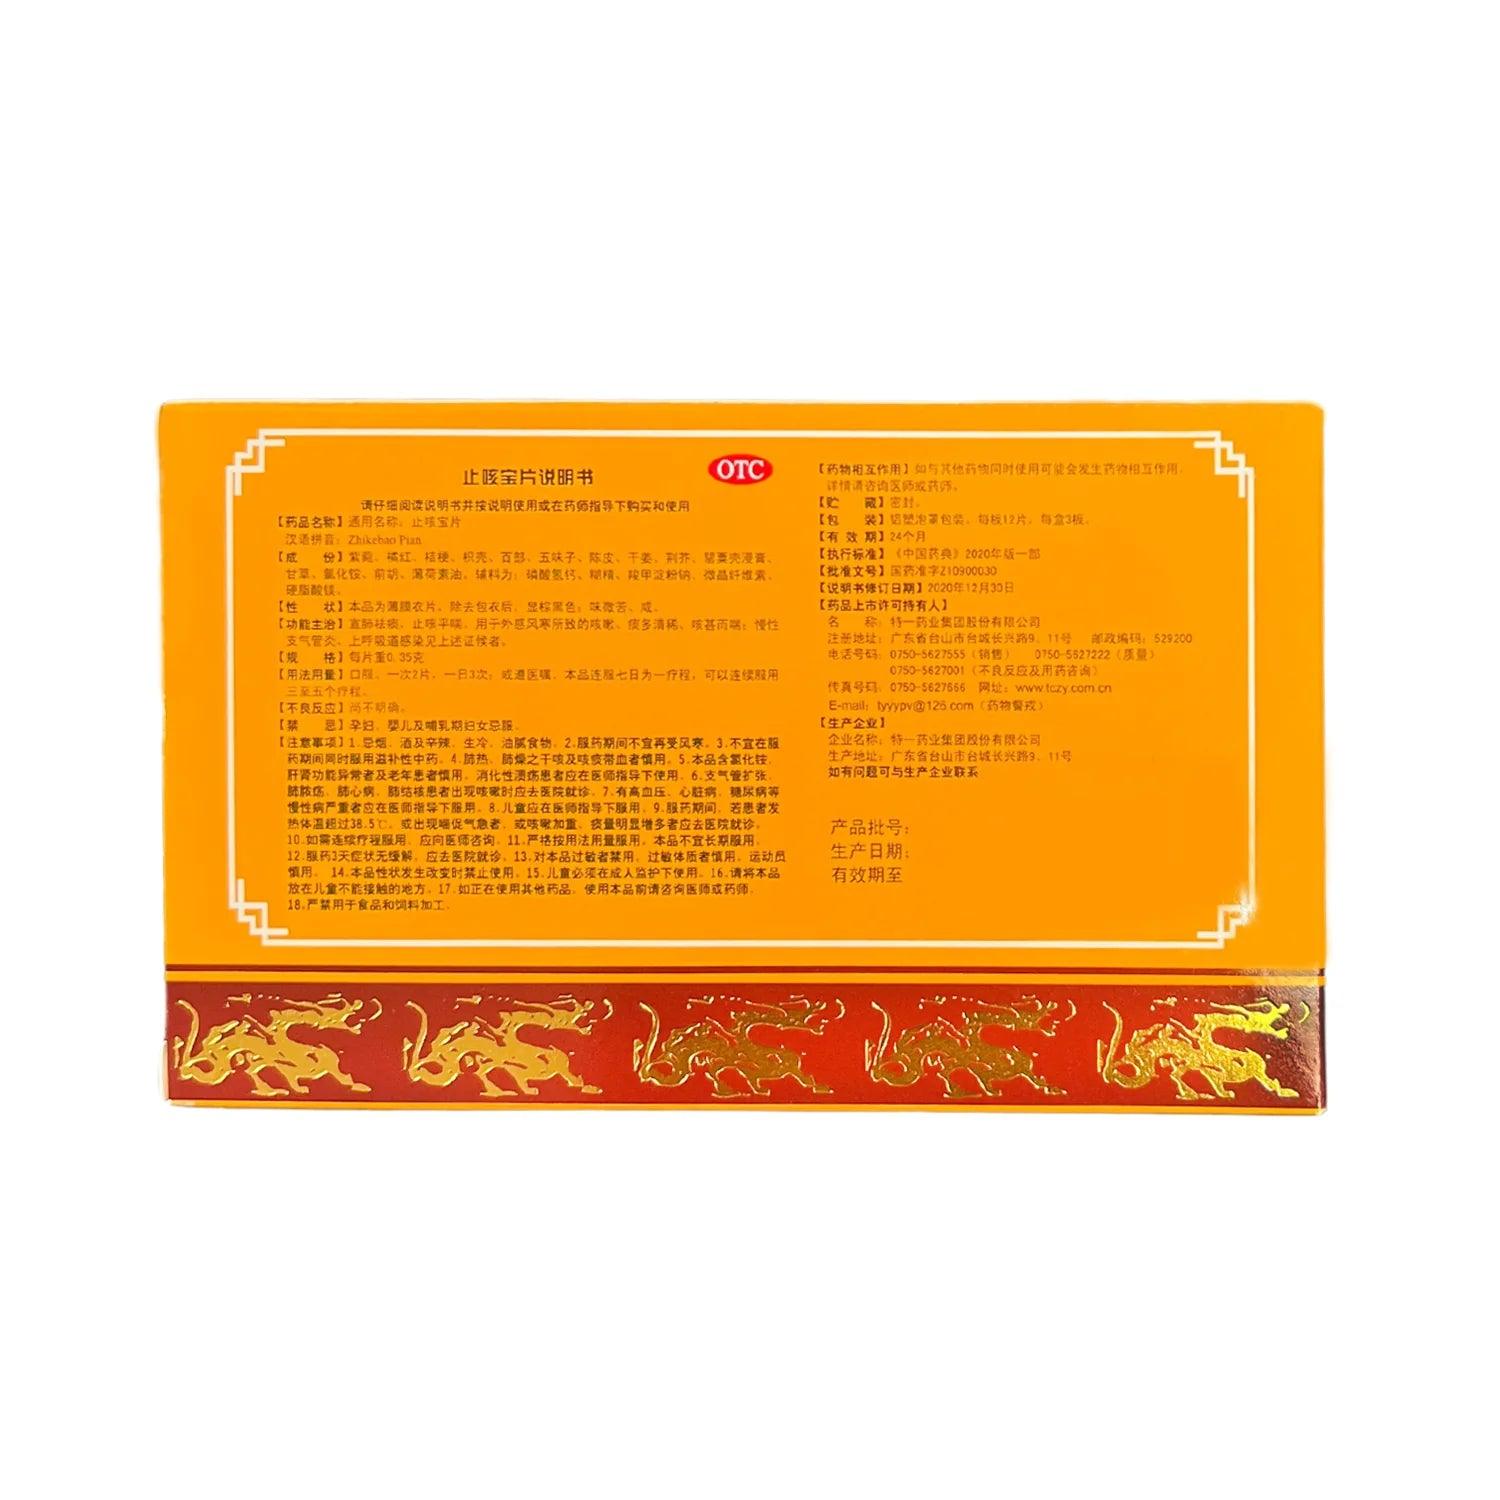 Zhikebao Pian, Helps Relief Cough (36 Pills) - Buy at New Green Nutrition